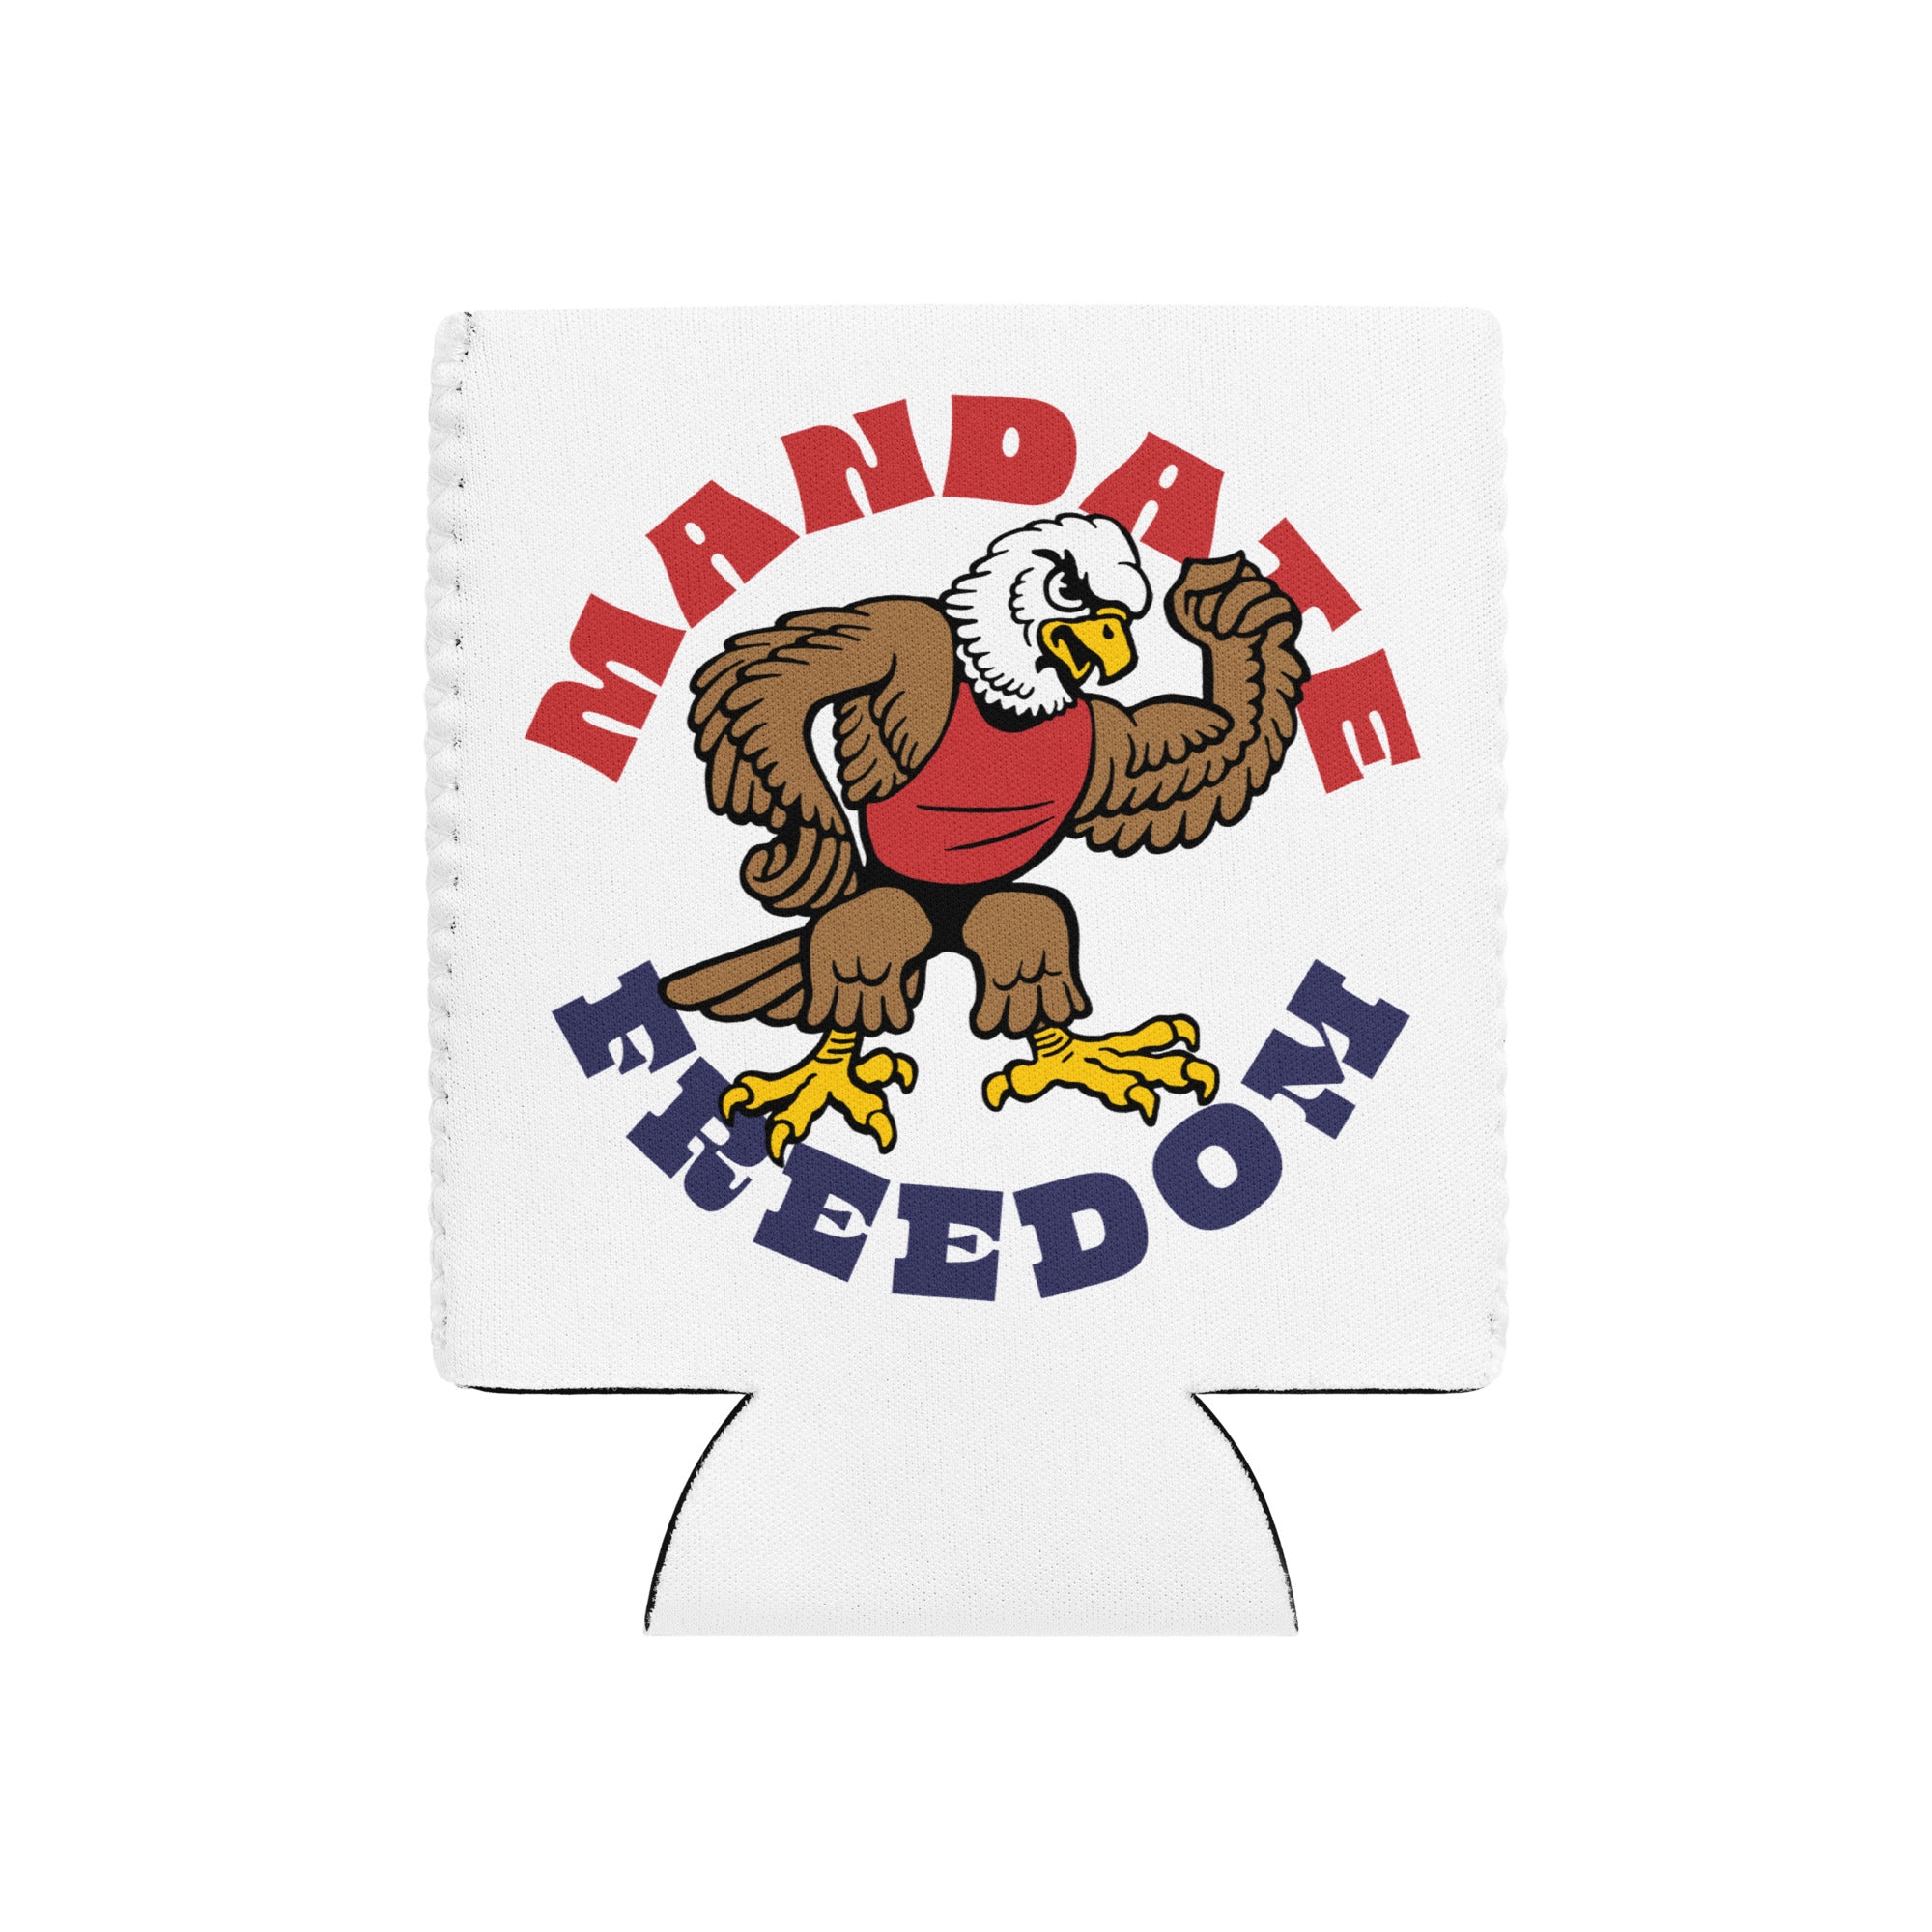 Mandate Freedom American Eagle Can Cooler